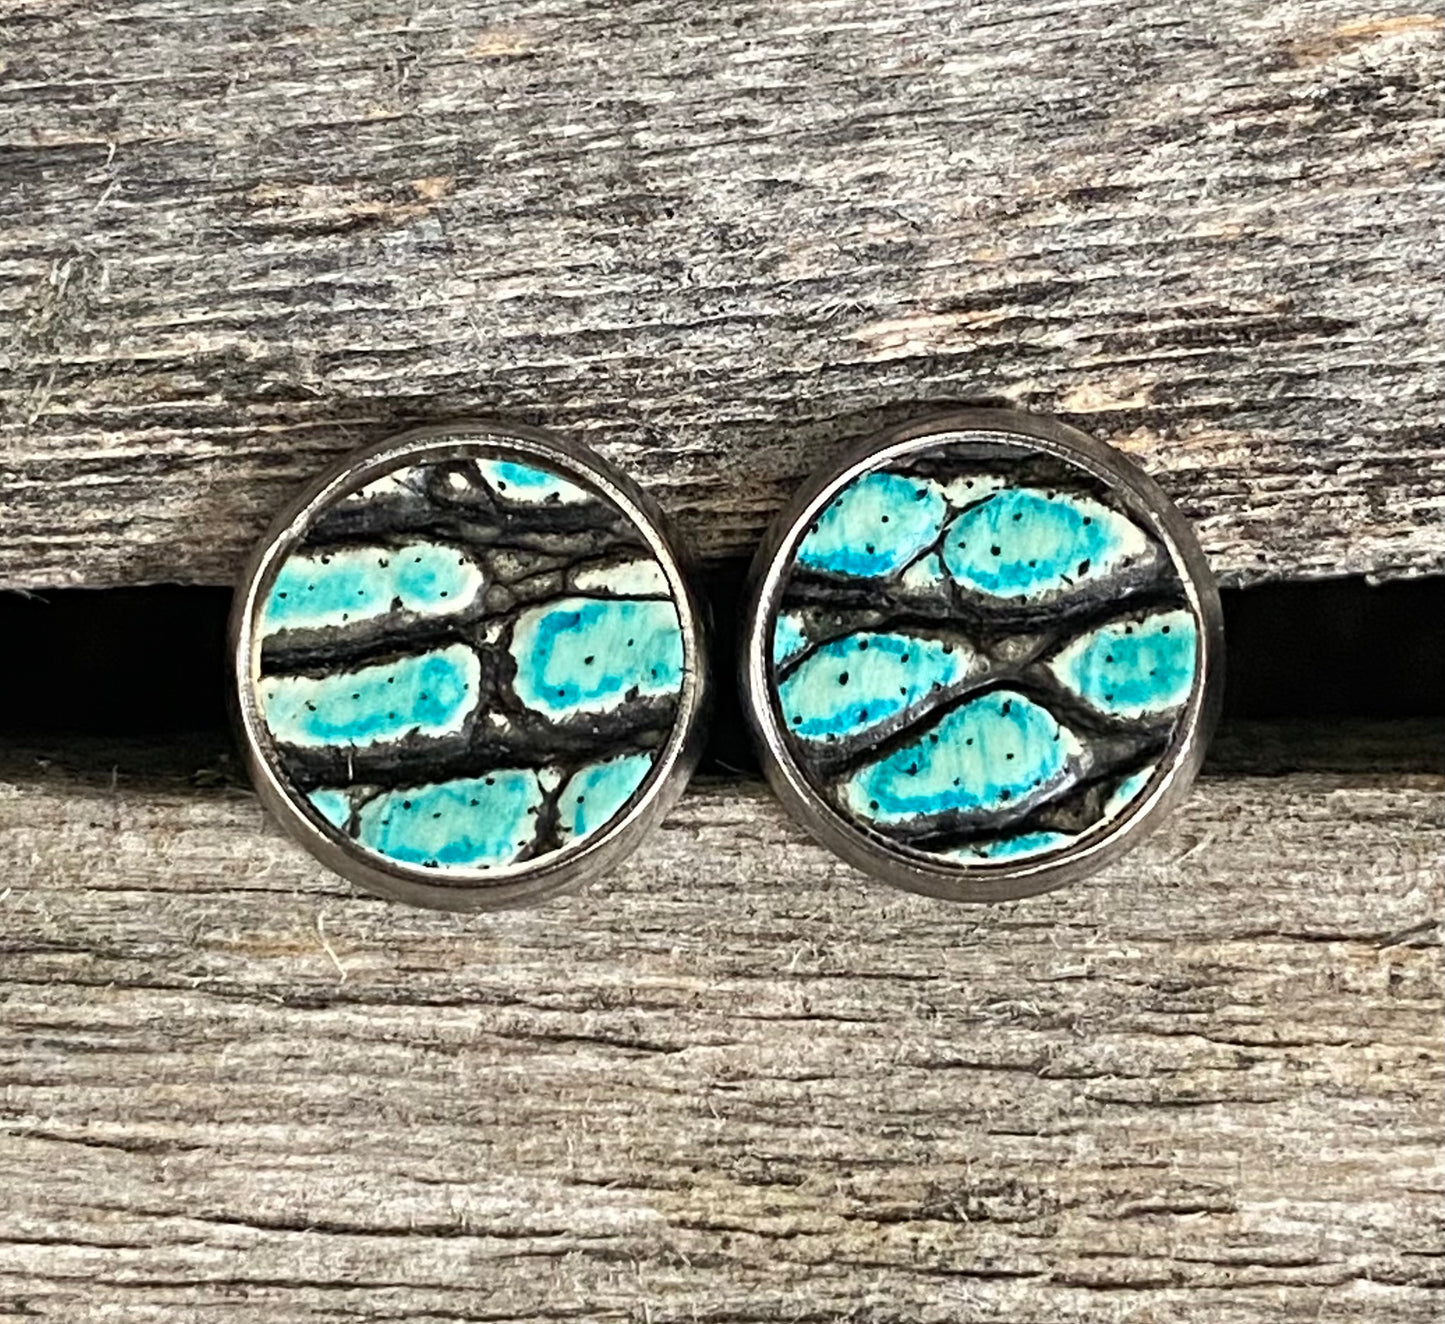 Turquoise Croc Leather Earrings